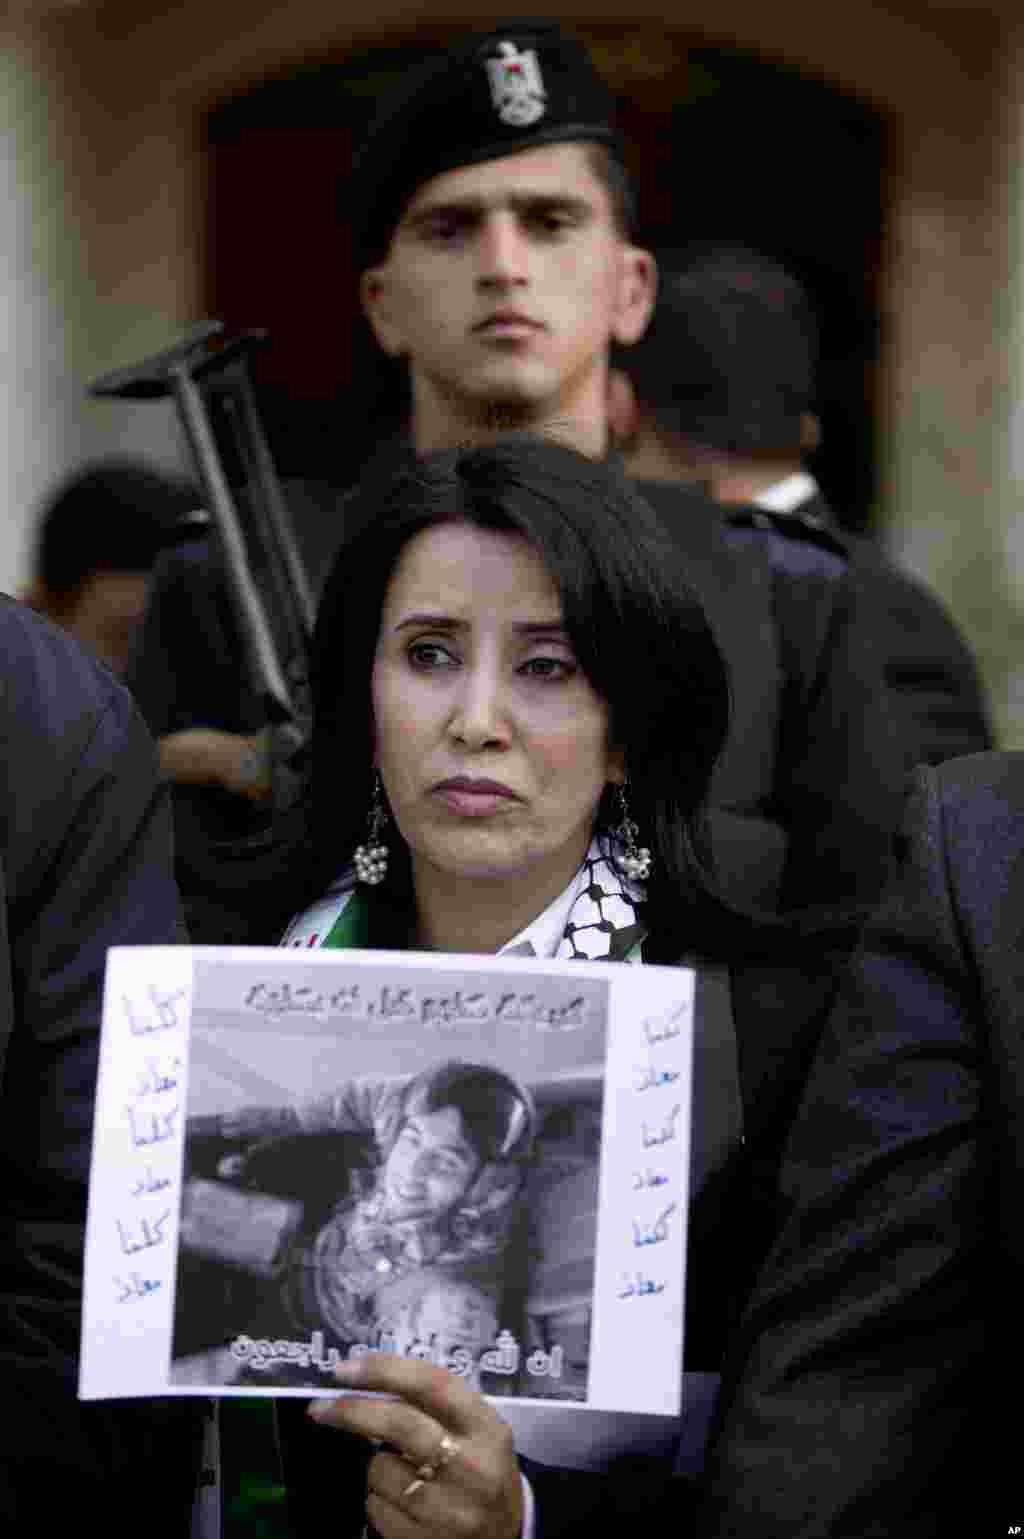 A Palestinian woman holds a poster with a picture of slain Jordanian pilot, Lt. Muath al-Kaseasbeh during a protest in front of the Jordanian embassy, in the West Bank City of Ramallah, Feb. 4, 2015.